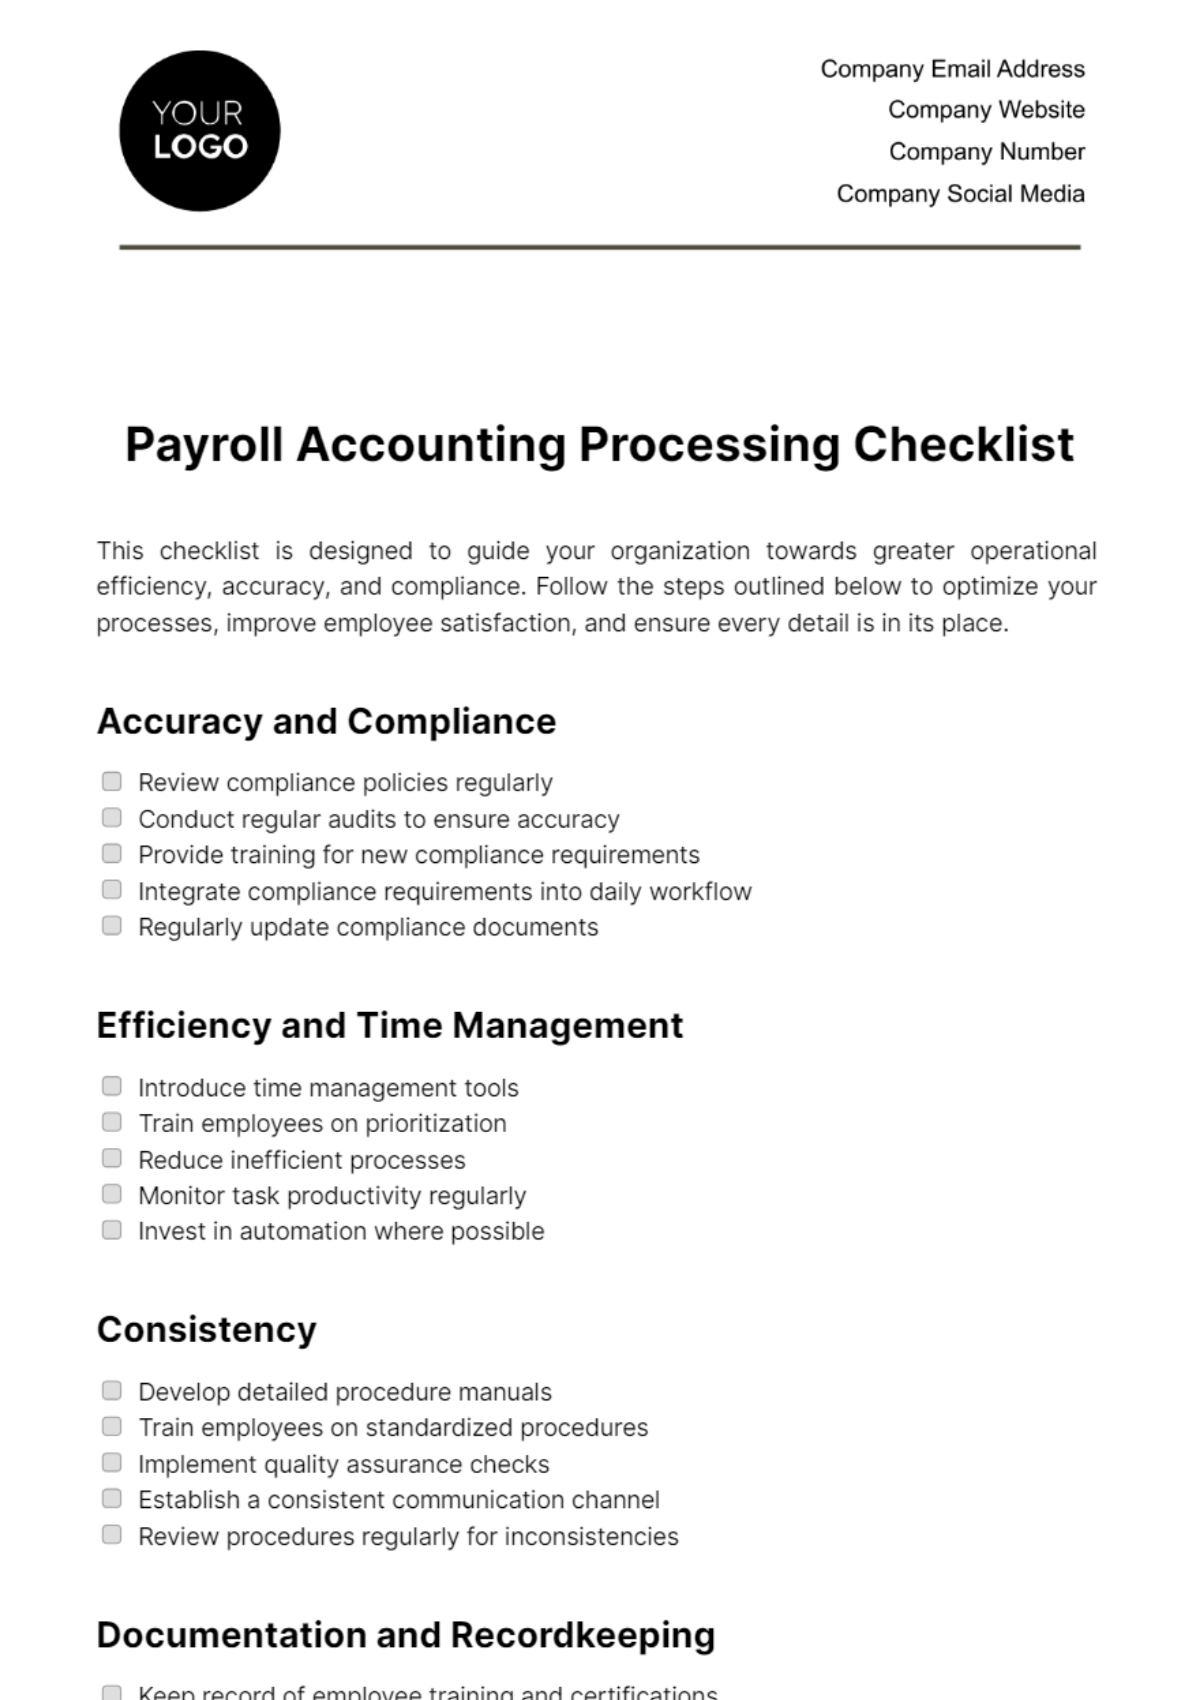 Free Payroll Accounting Processing Checklist Template